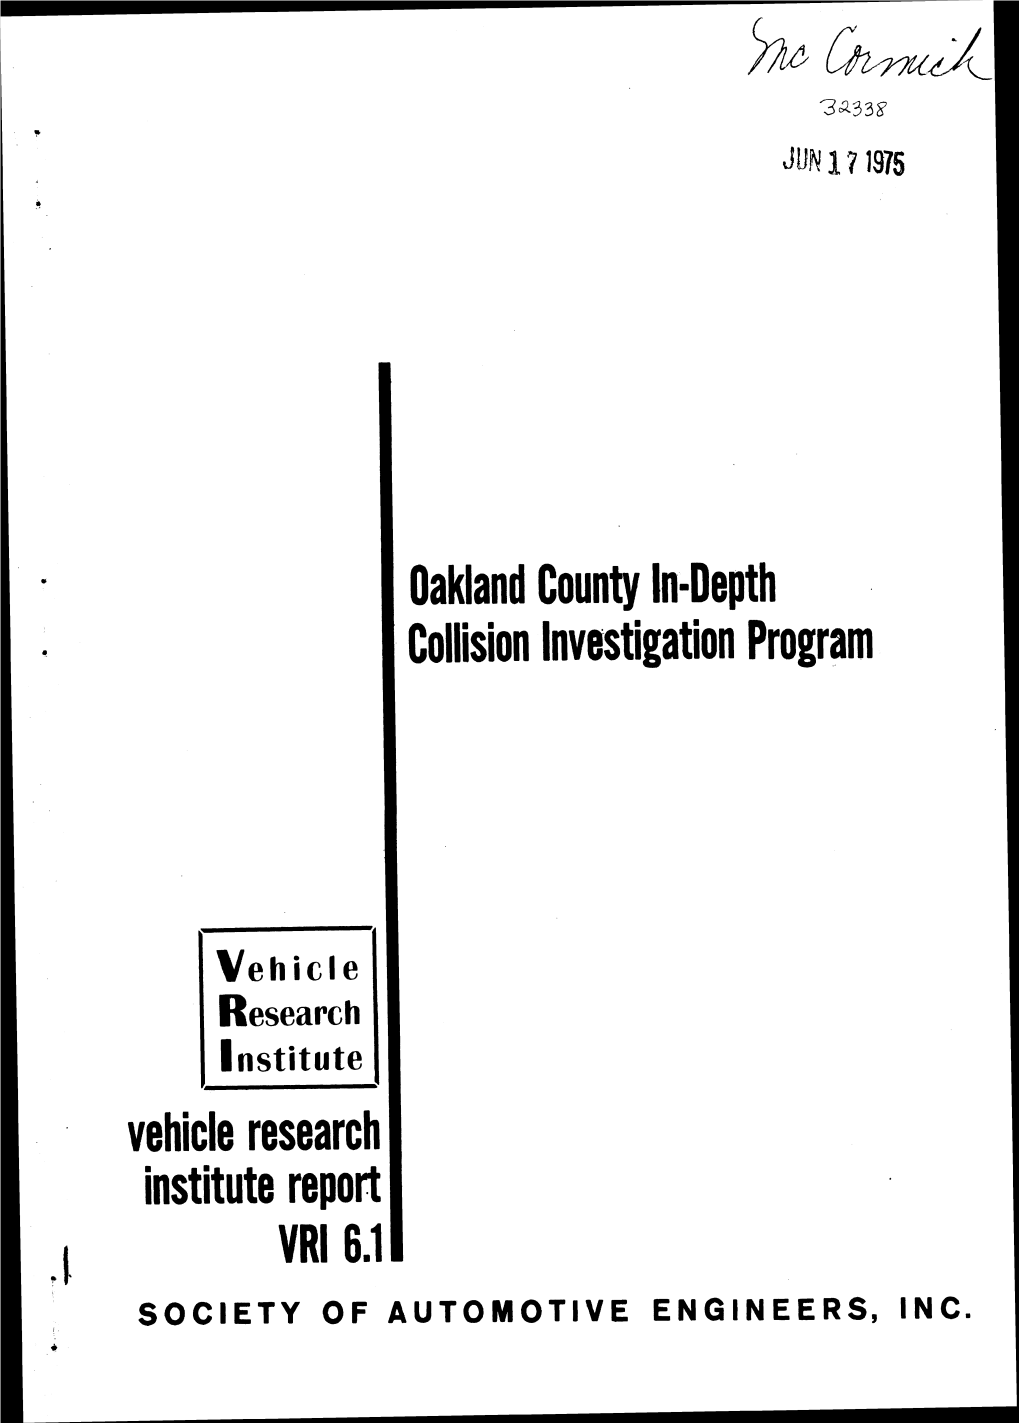 Vehicle Research Institute Report Oakland County In=Depth Collision